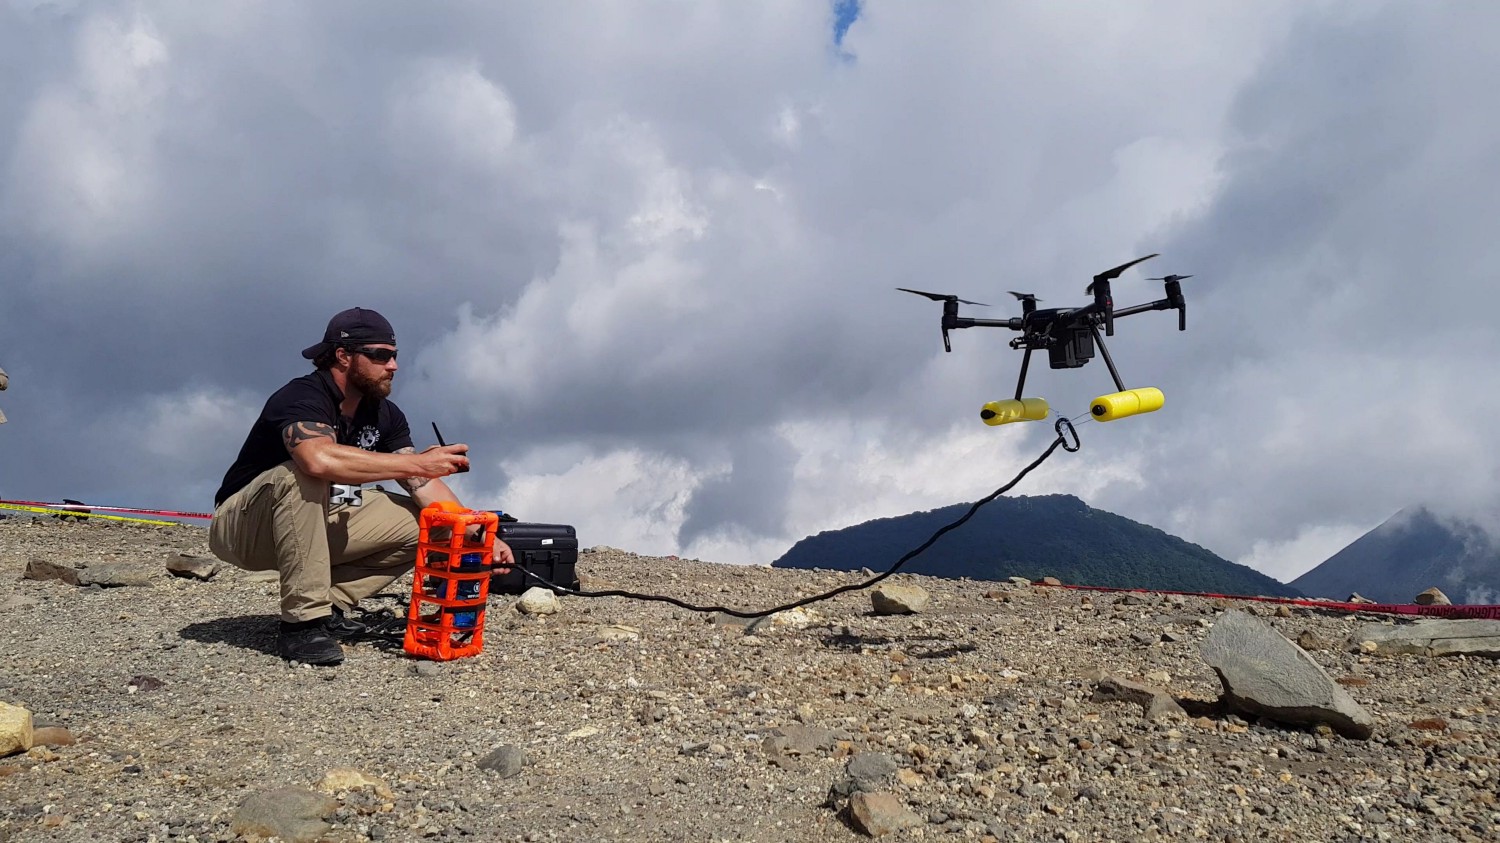 Expert on mission Clayton Covel readies a drone to collect a water sample from the crater of Santa Ana. Photo: WFP/Katarzyna Chojnacka